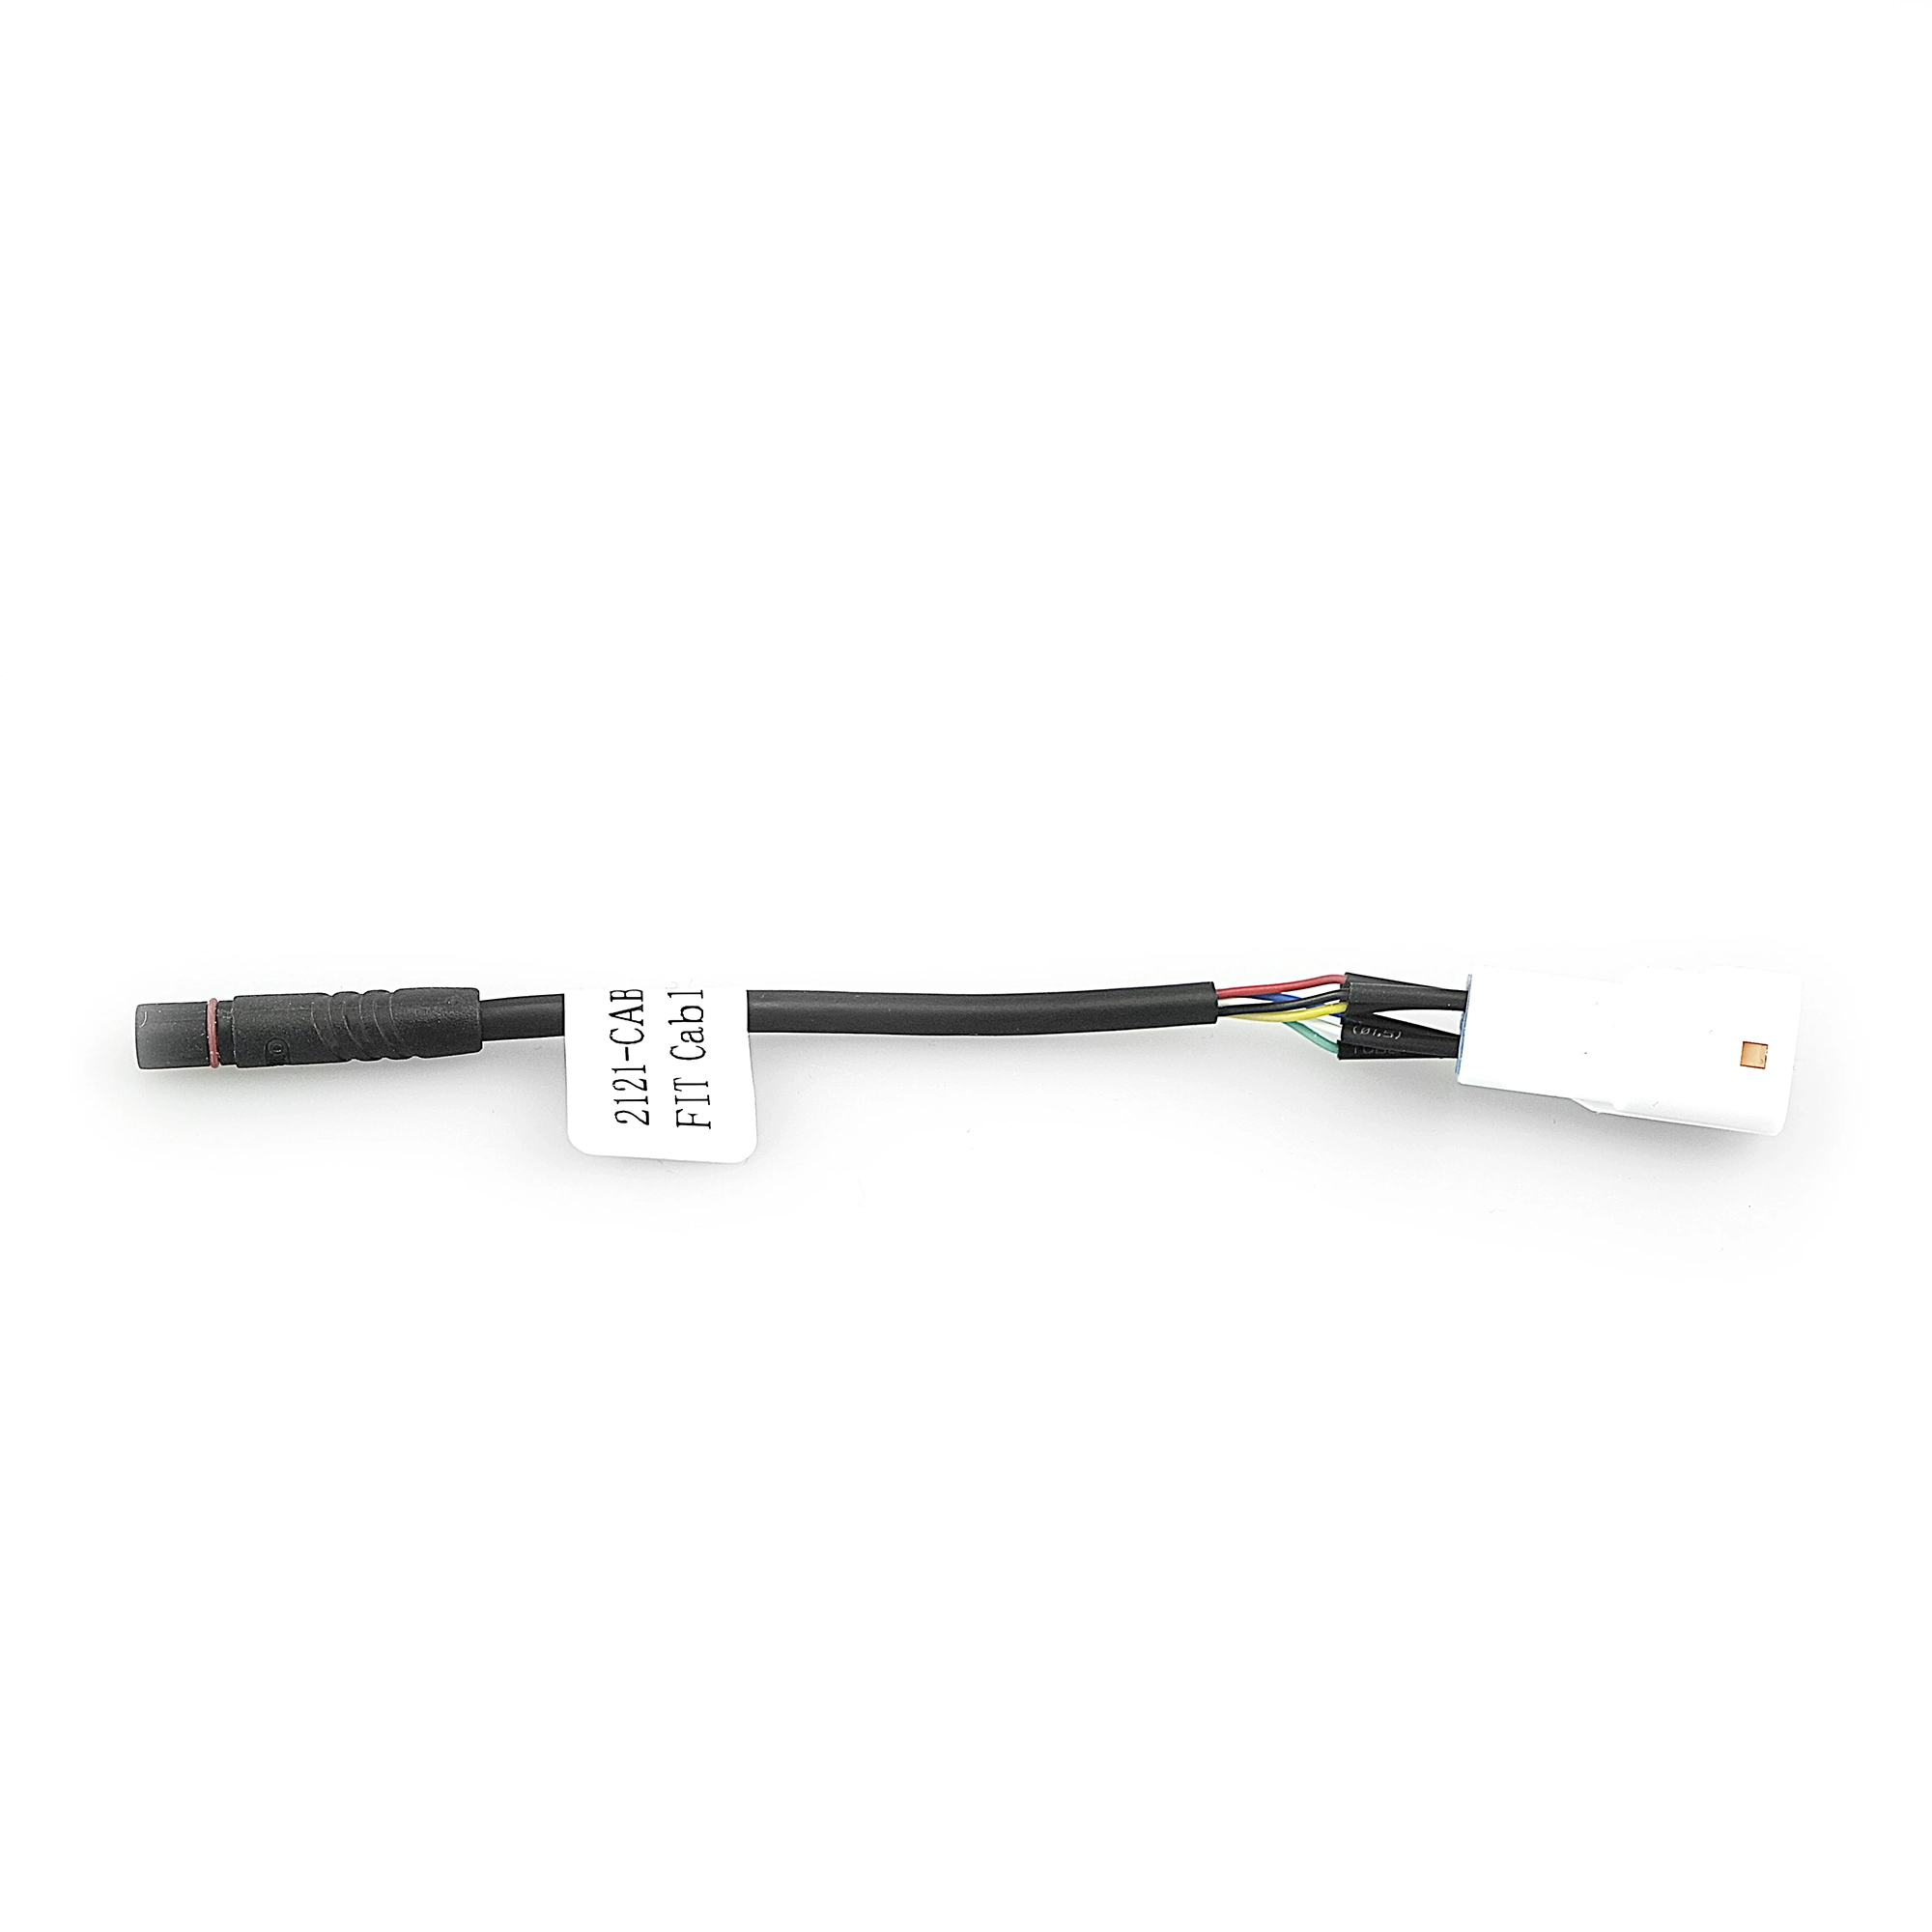 FIT adapter cable for connecting accessories